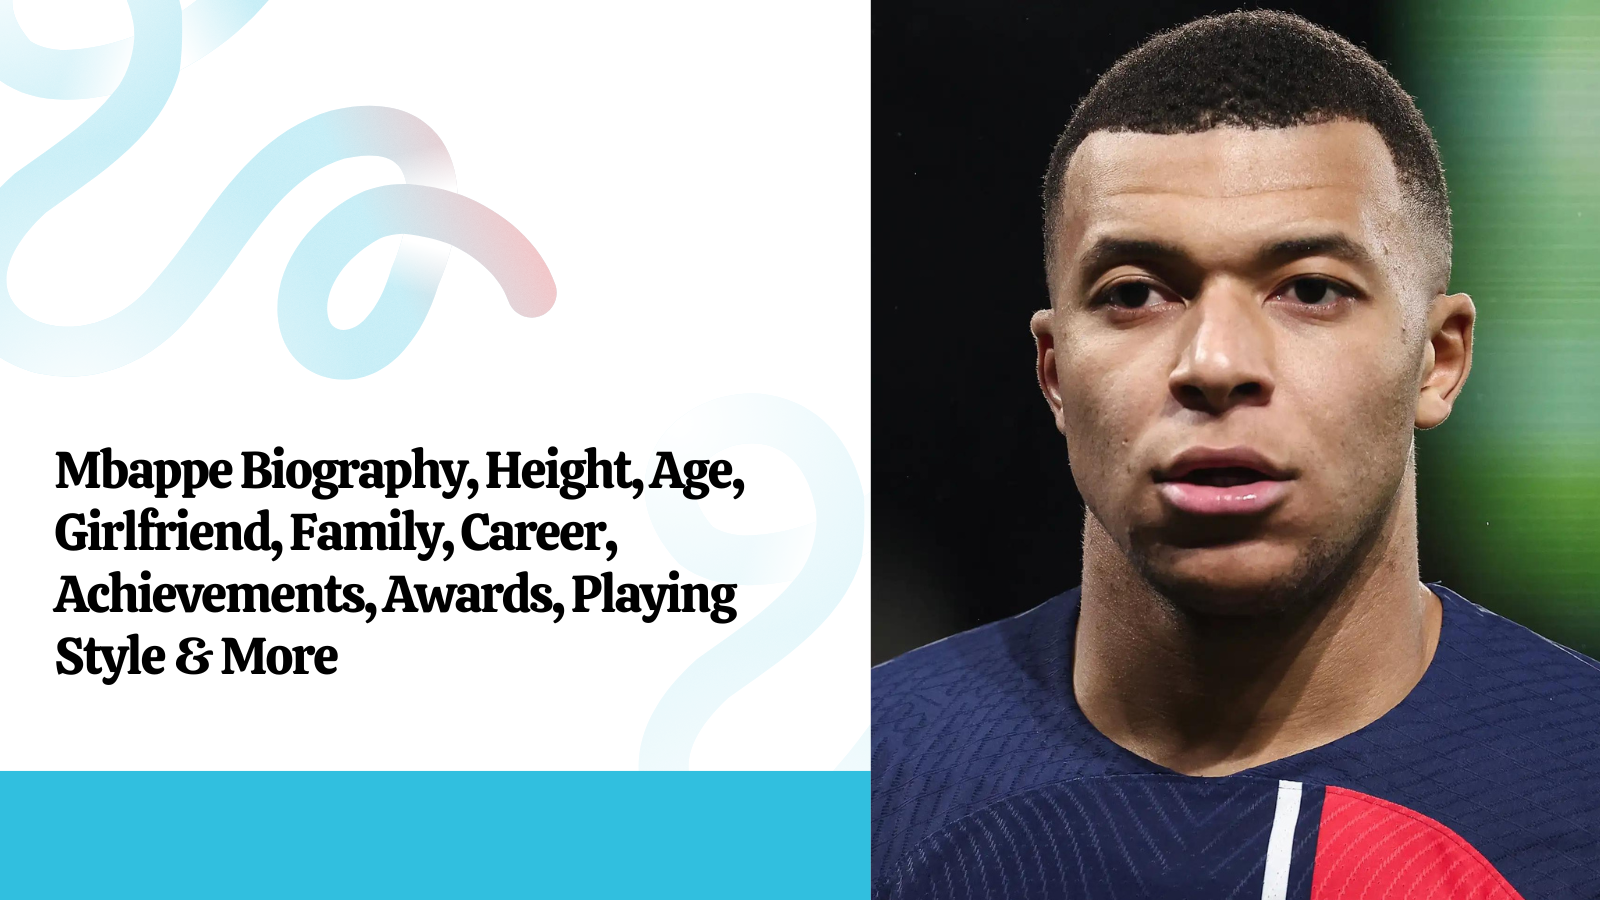 Mbappe Biography, Height, Age, Girlfriend, Family, Career, Achievements, Awards, Playing Style & More